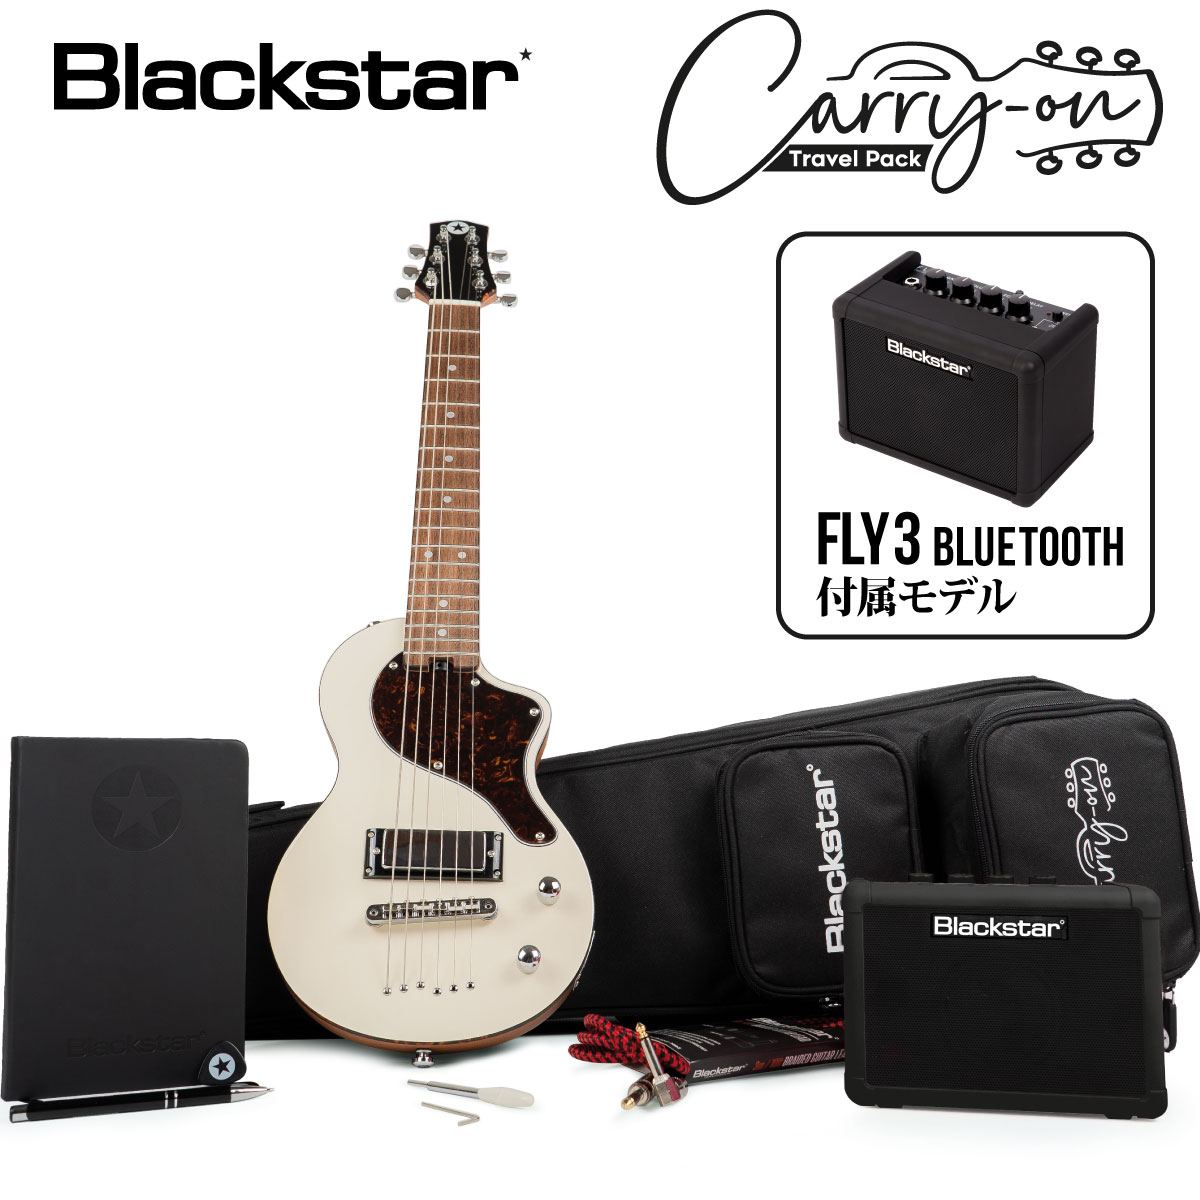 Blackstar Carry-on Deluxe Pack -White- 新品 楽天市場 Guitar 白 ホワイト ブラックスター エレキギター Electric 国内送料無料